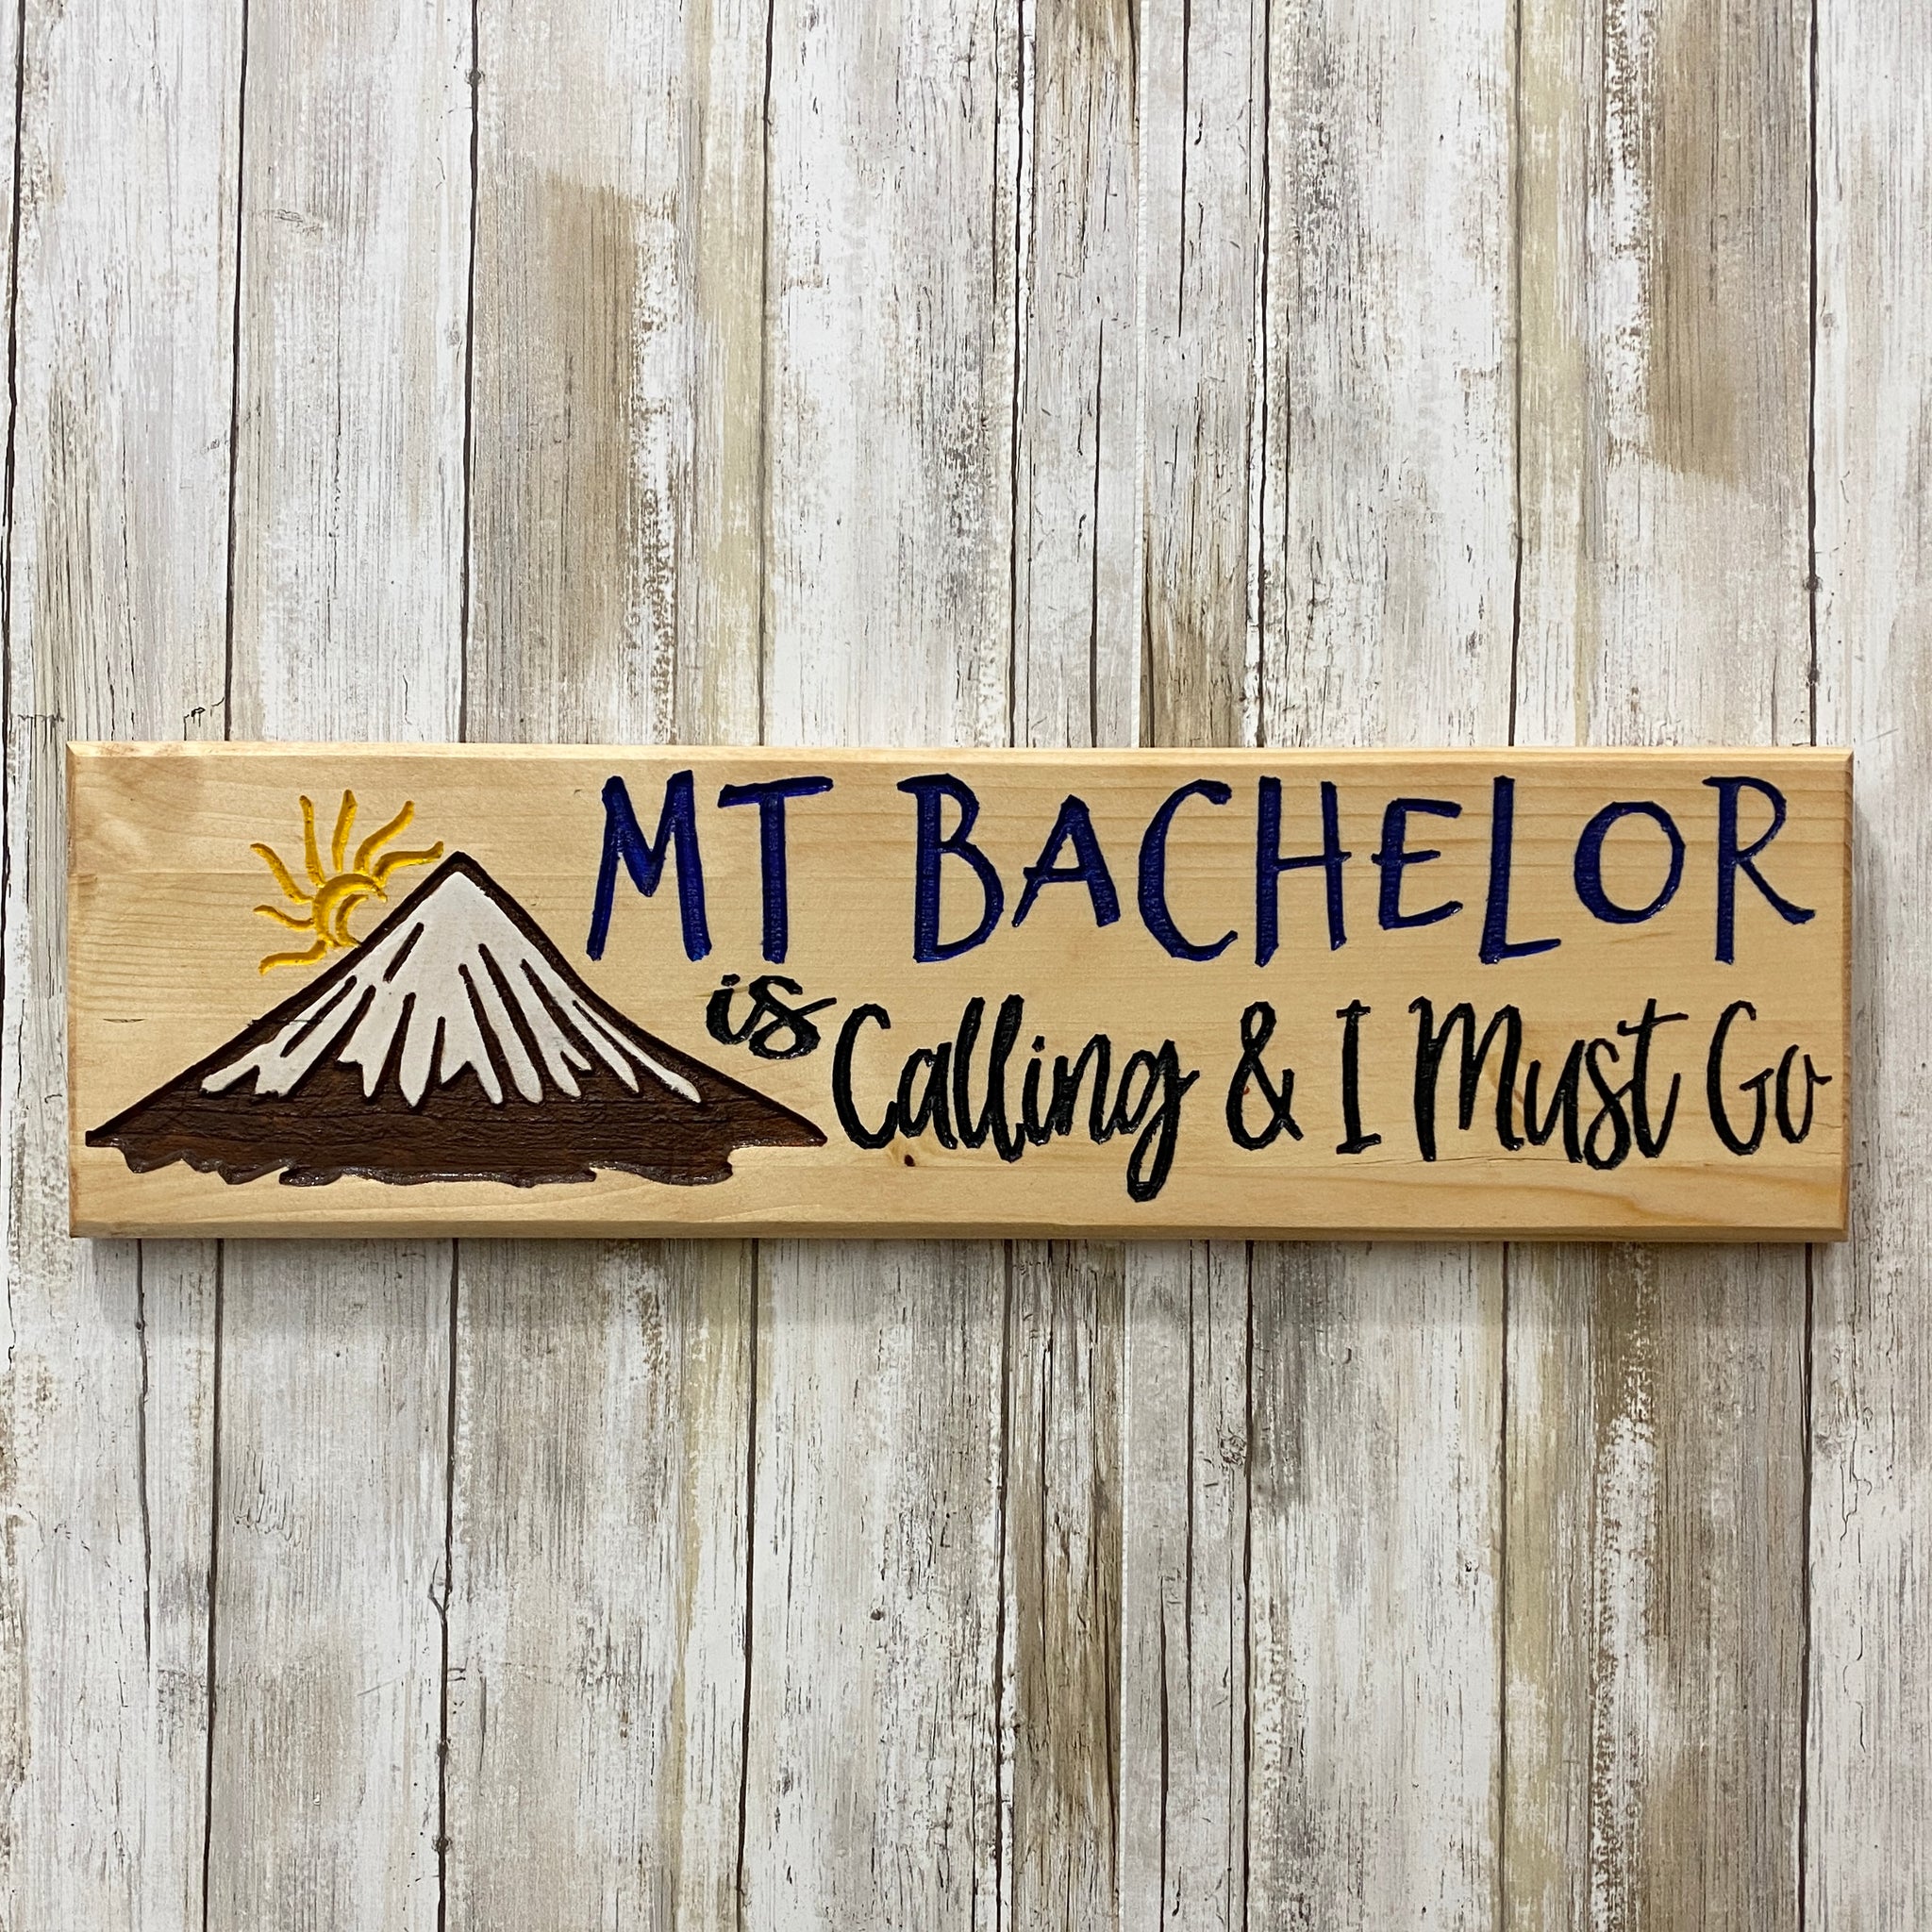 Mt. Bachelor is Calling and I Must Go - Carved Pine Wood Wall Hanging Sign